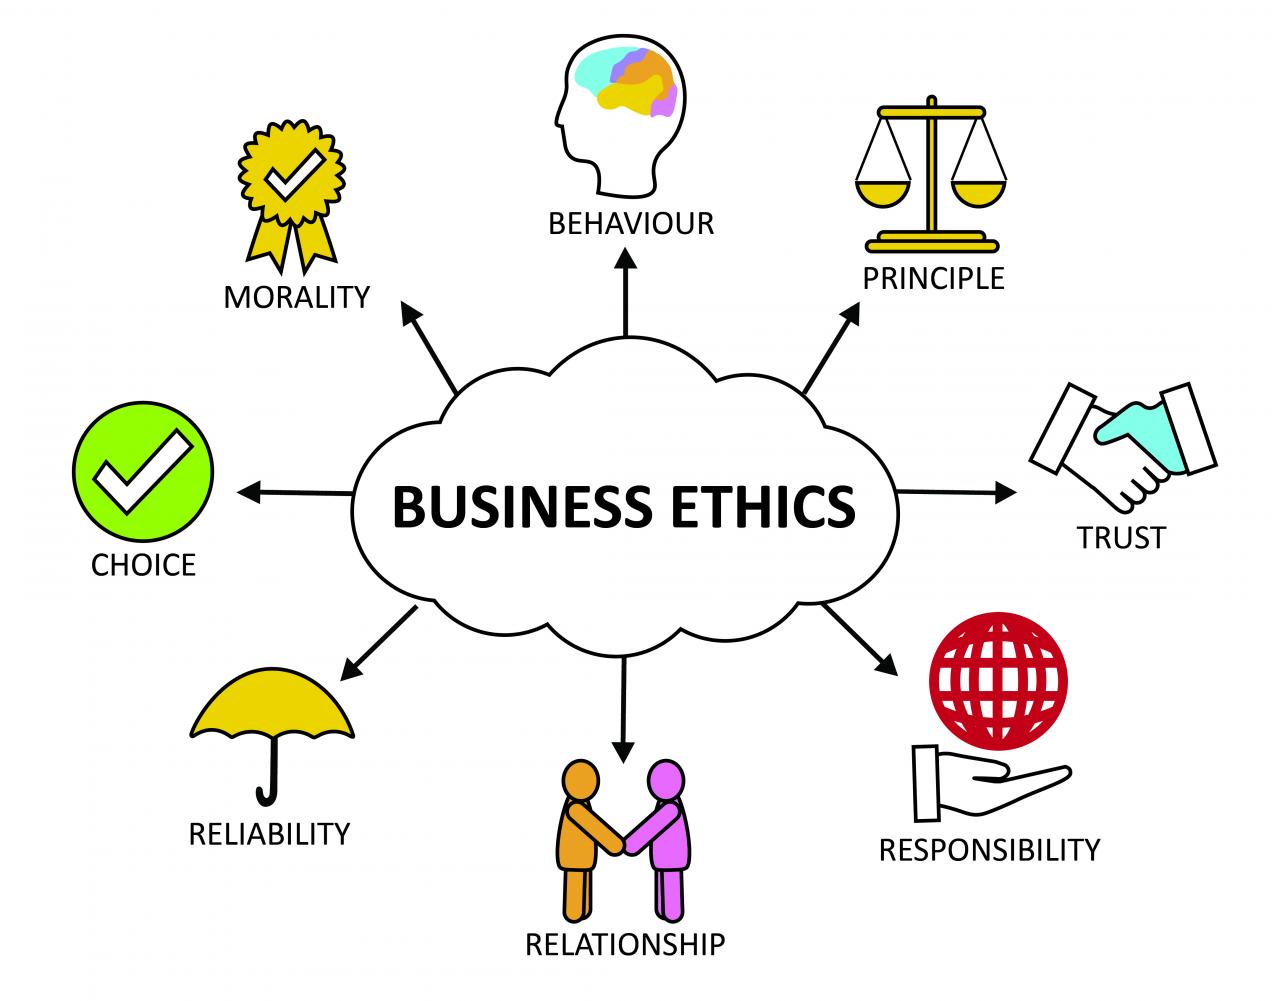 An ethical business example